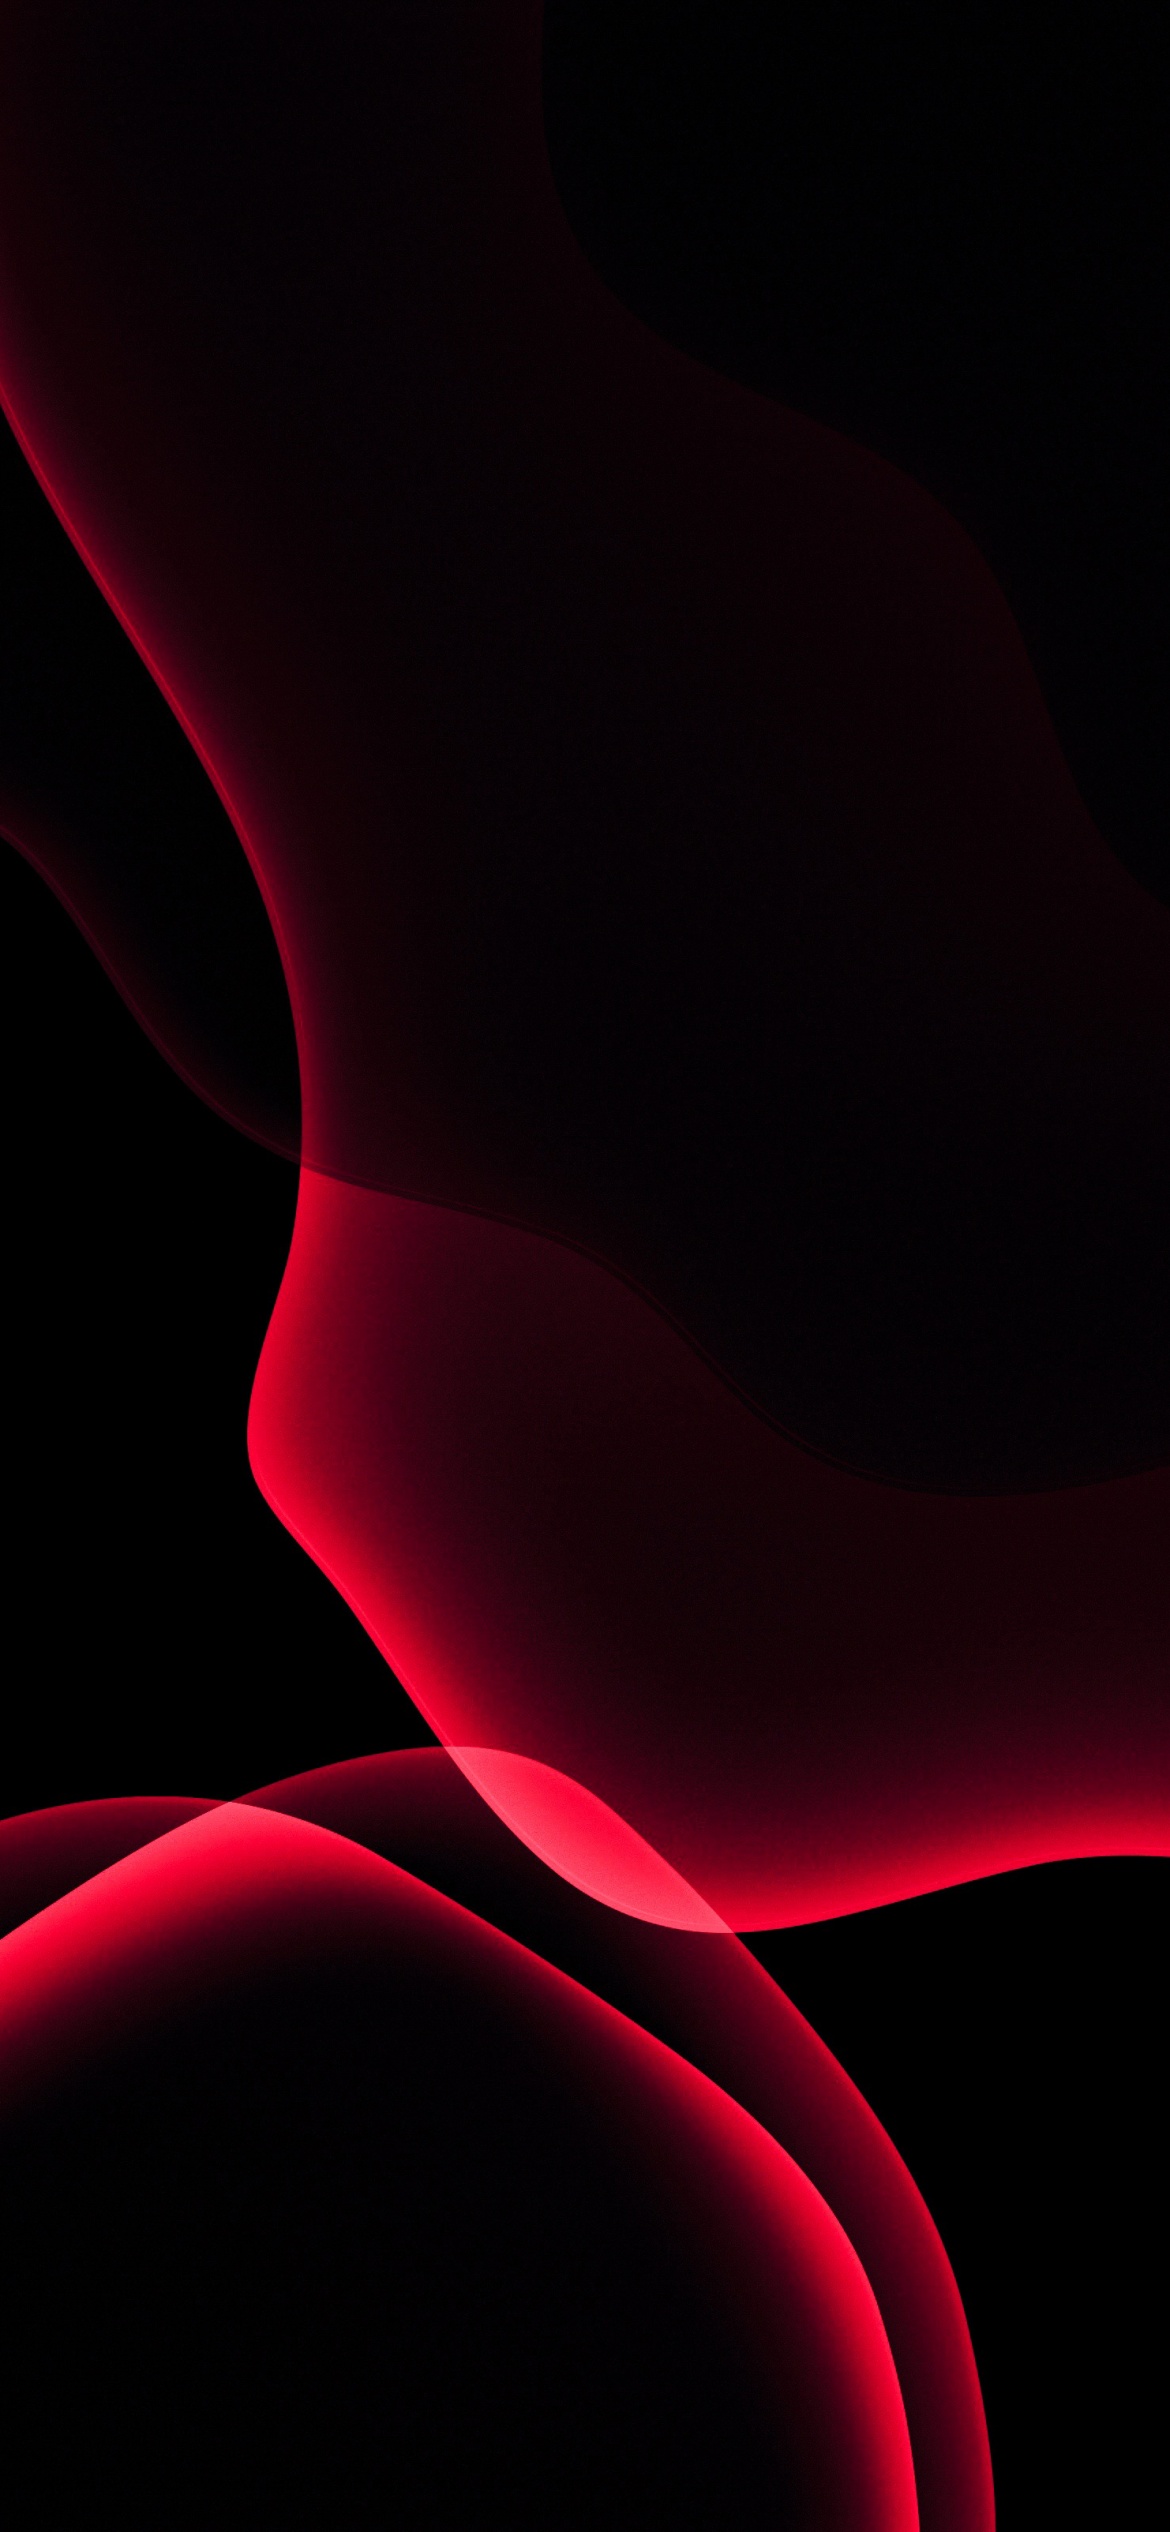 iOS 13 Wallpapers 4K, Stock, iPadOS, Red, Black background, AMOLED, HD, Abstract,